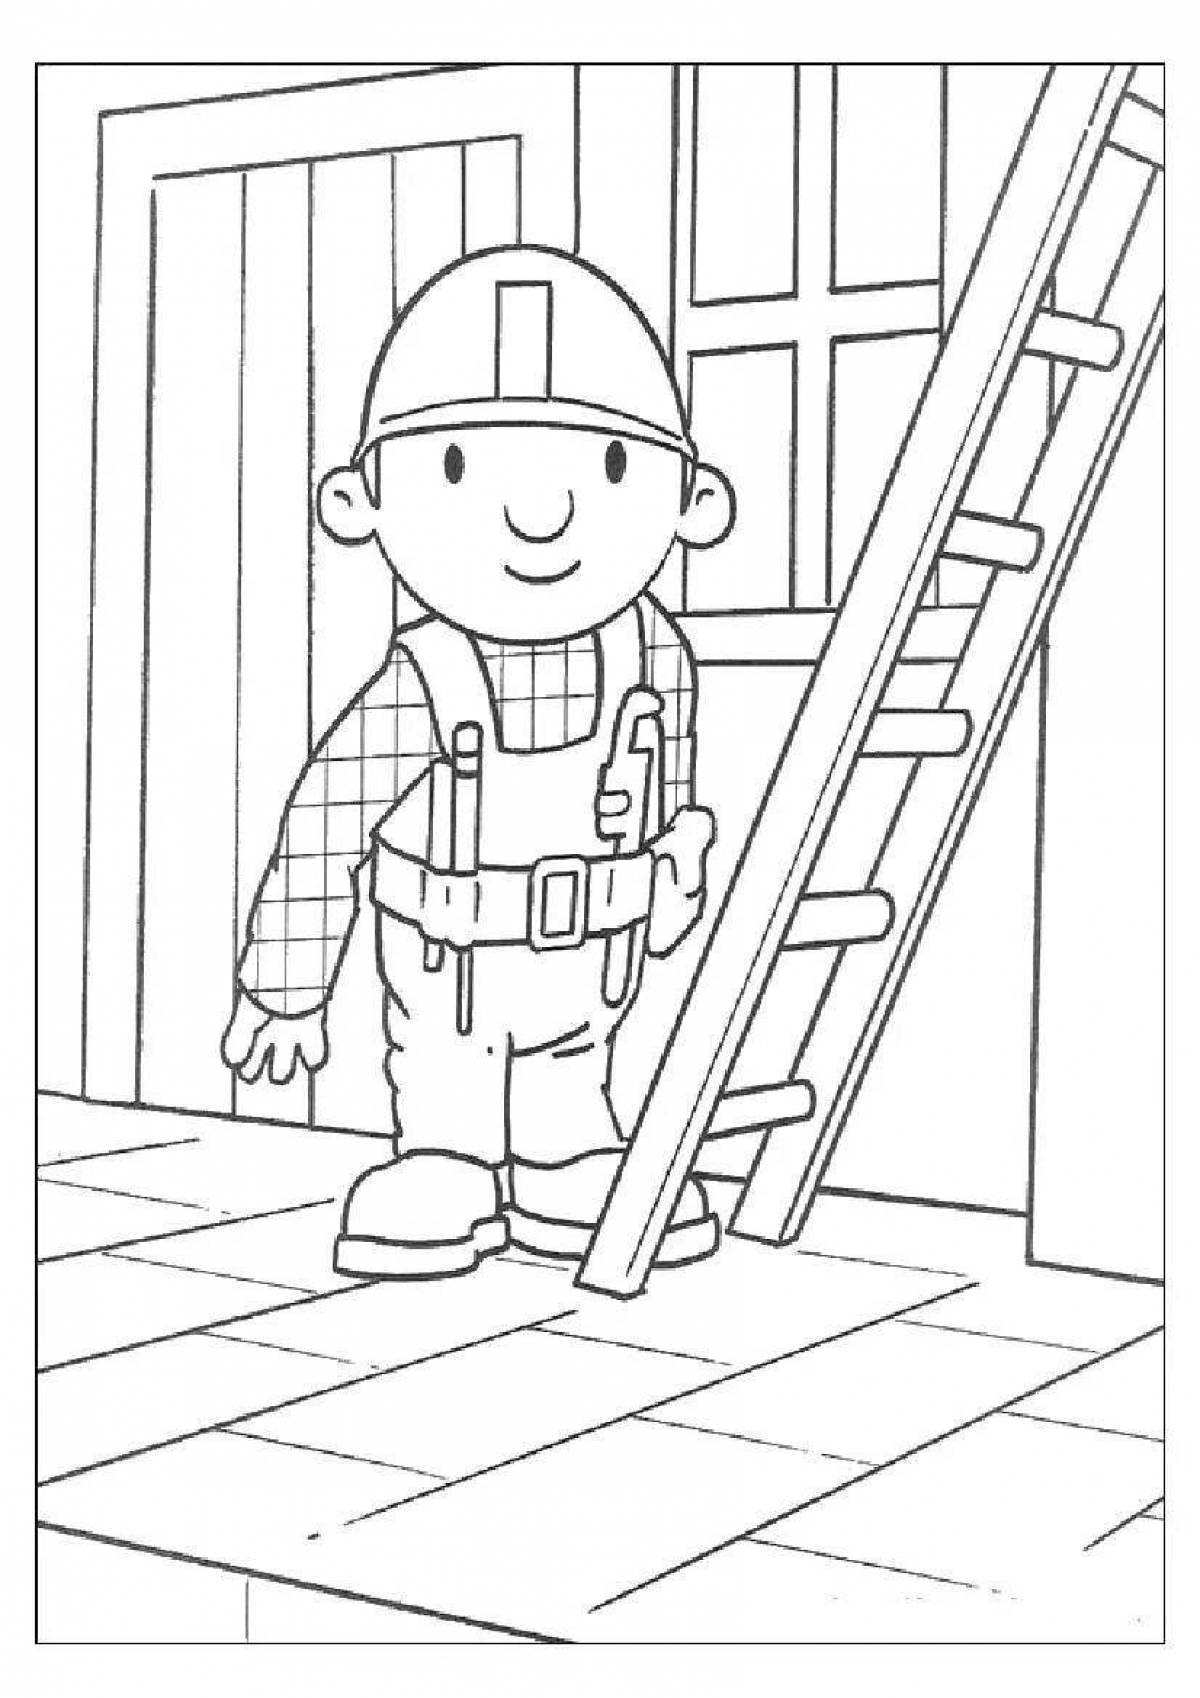 Coloring book attractive construction professions